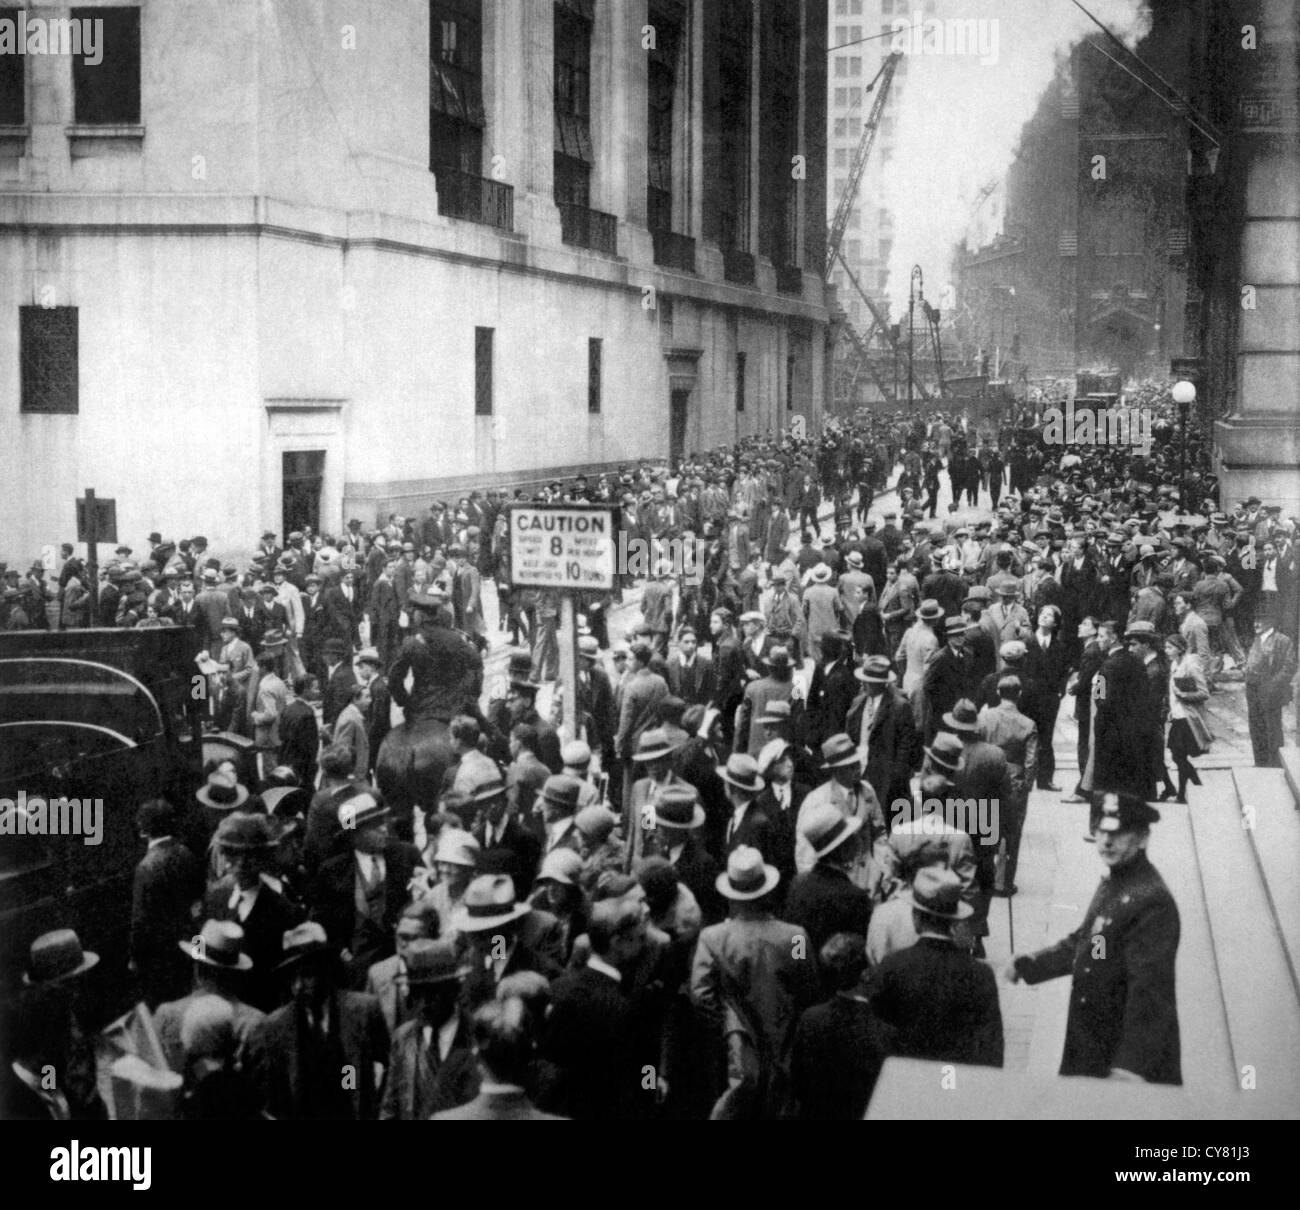 Crowd Outside Stock Exchange Building on Wall Street, New York City, USA, Wall Street Crash of October 24, 1929 Stock Photo